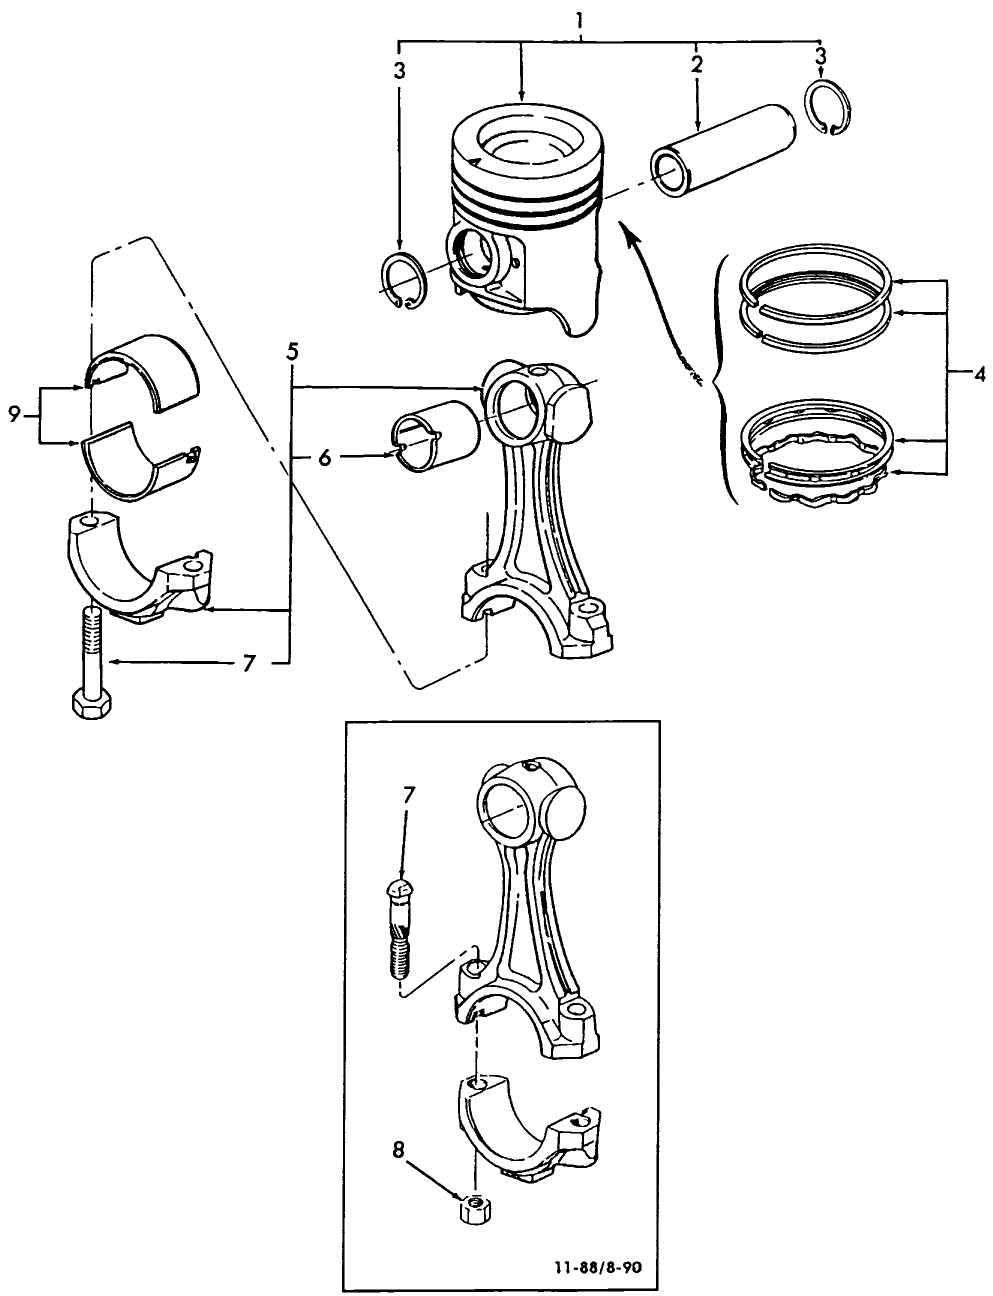 06E01 PISTONS, CONNECTING RODS & RELATED PARTS